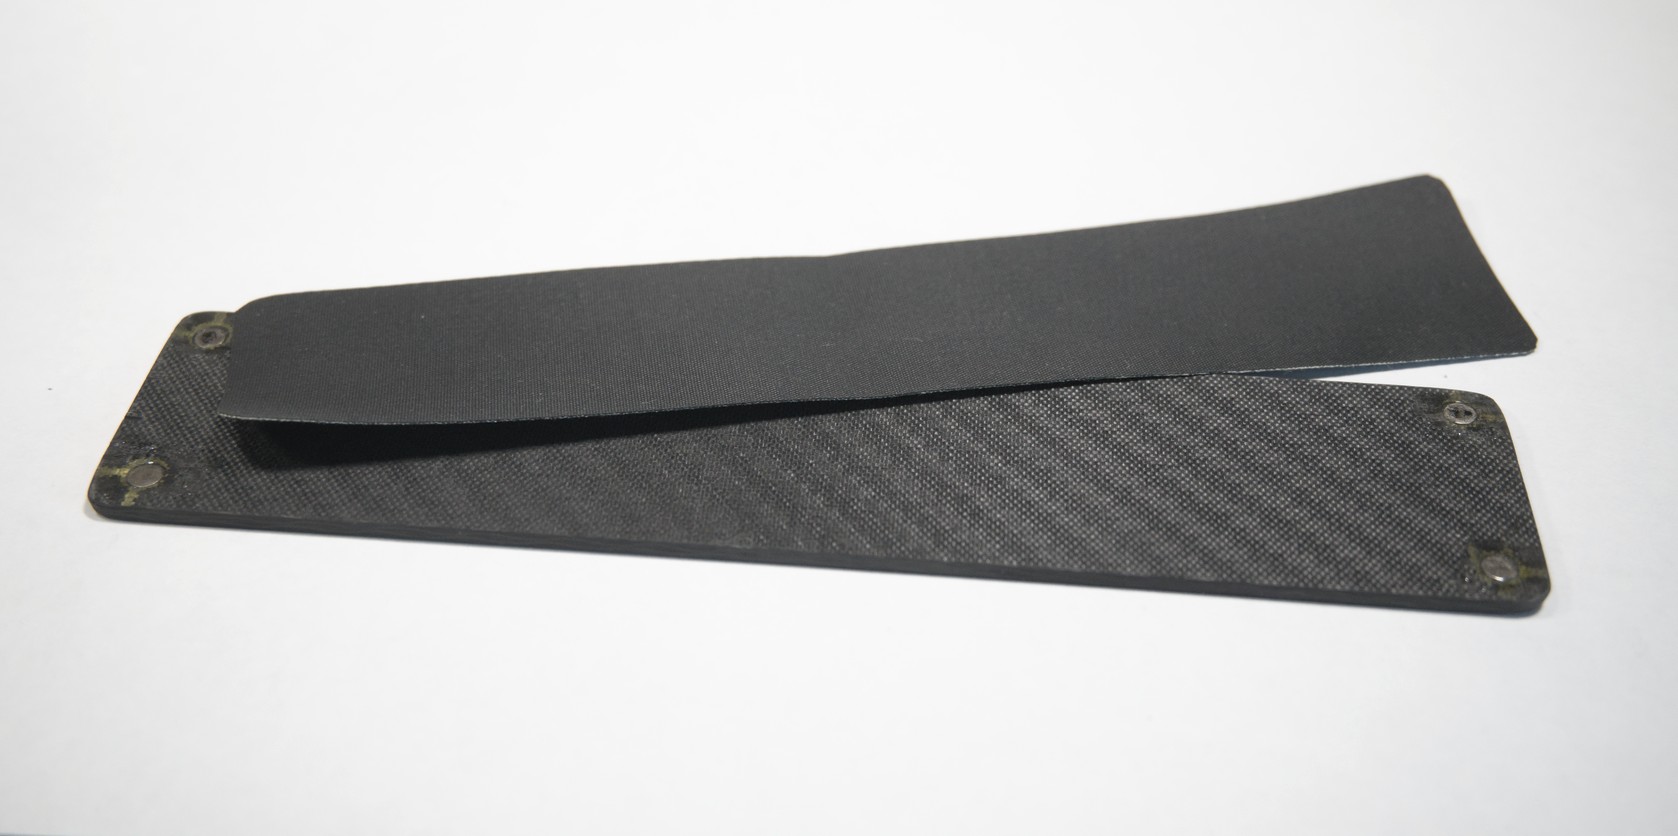 A sheet of carbon fibre the same size as the box. In each corner is a small disc-shaped magnet. Layed partly on top is a sheet of rubber the same size.